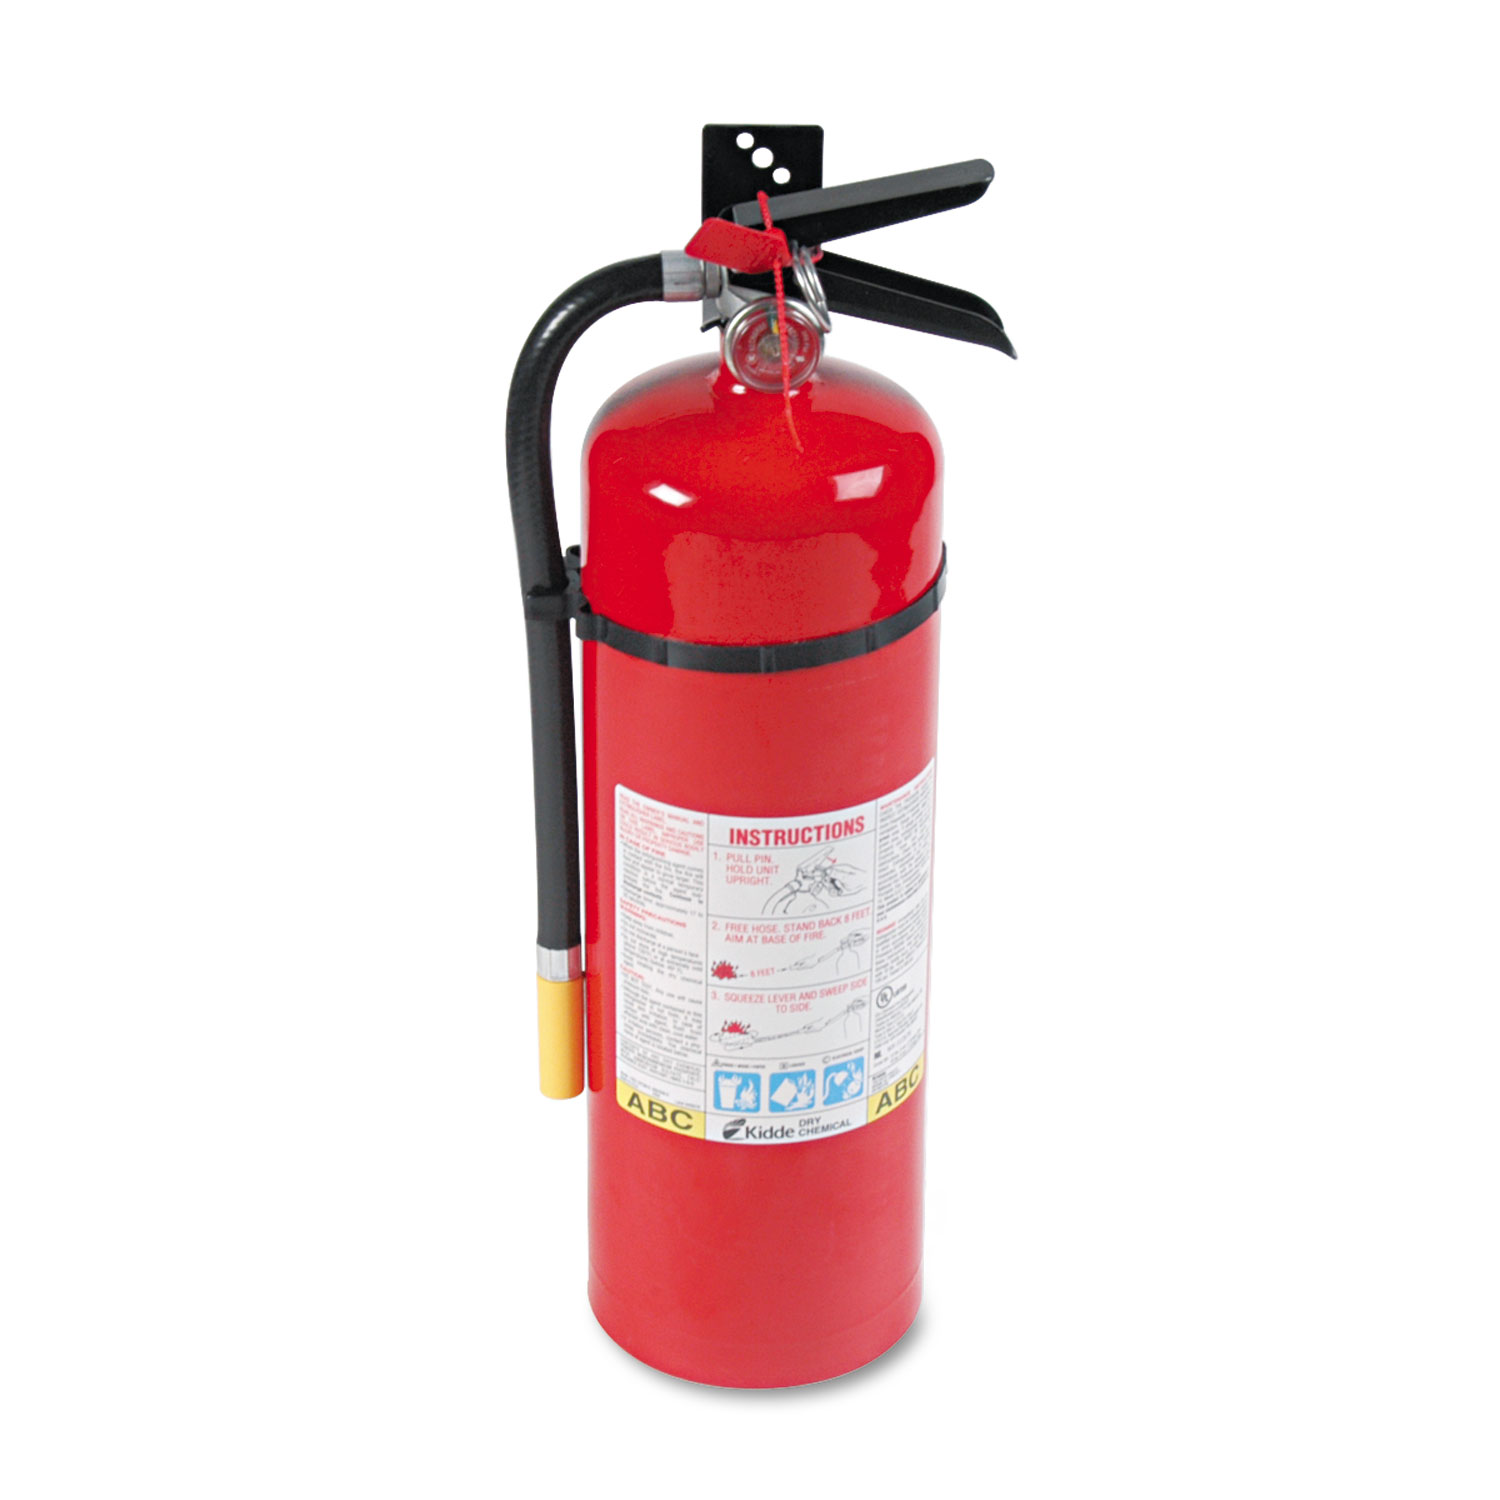 ABC Fire Extinguisher - General Insulation